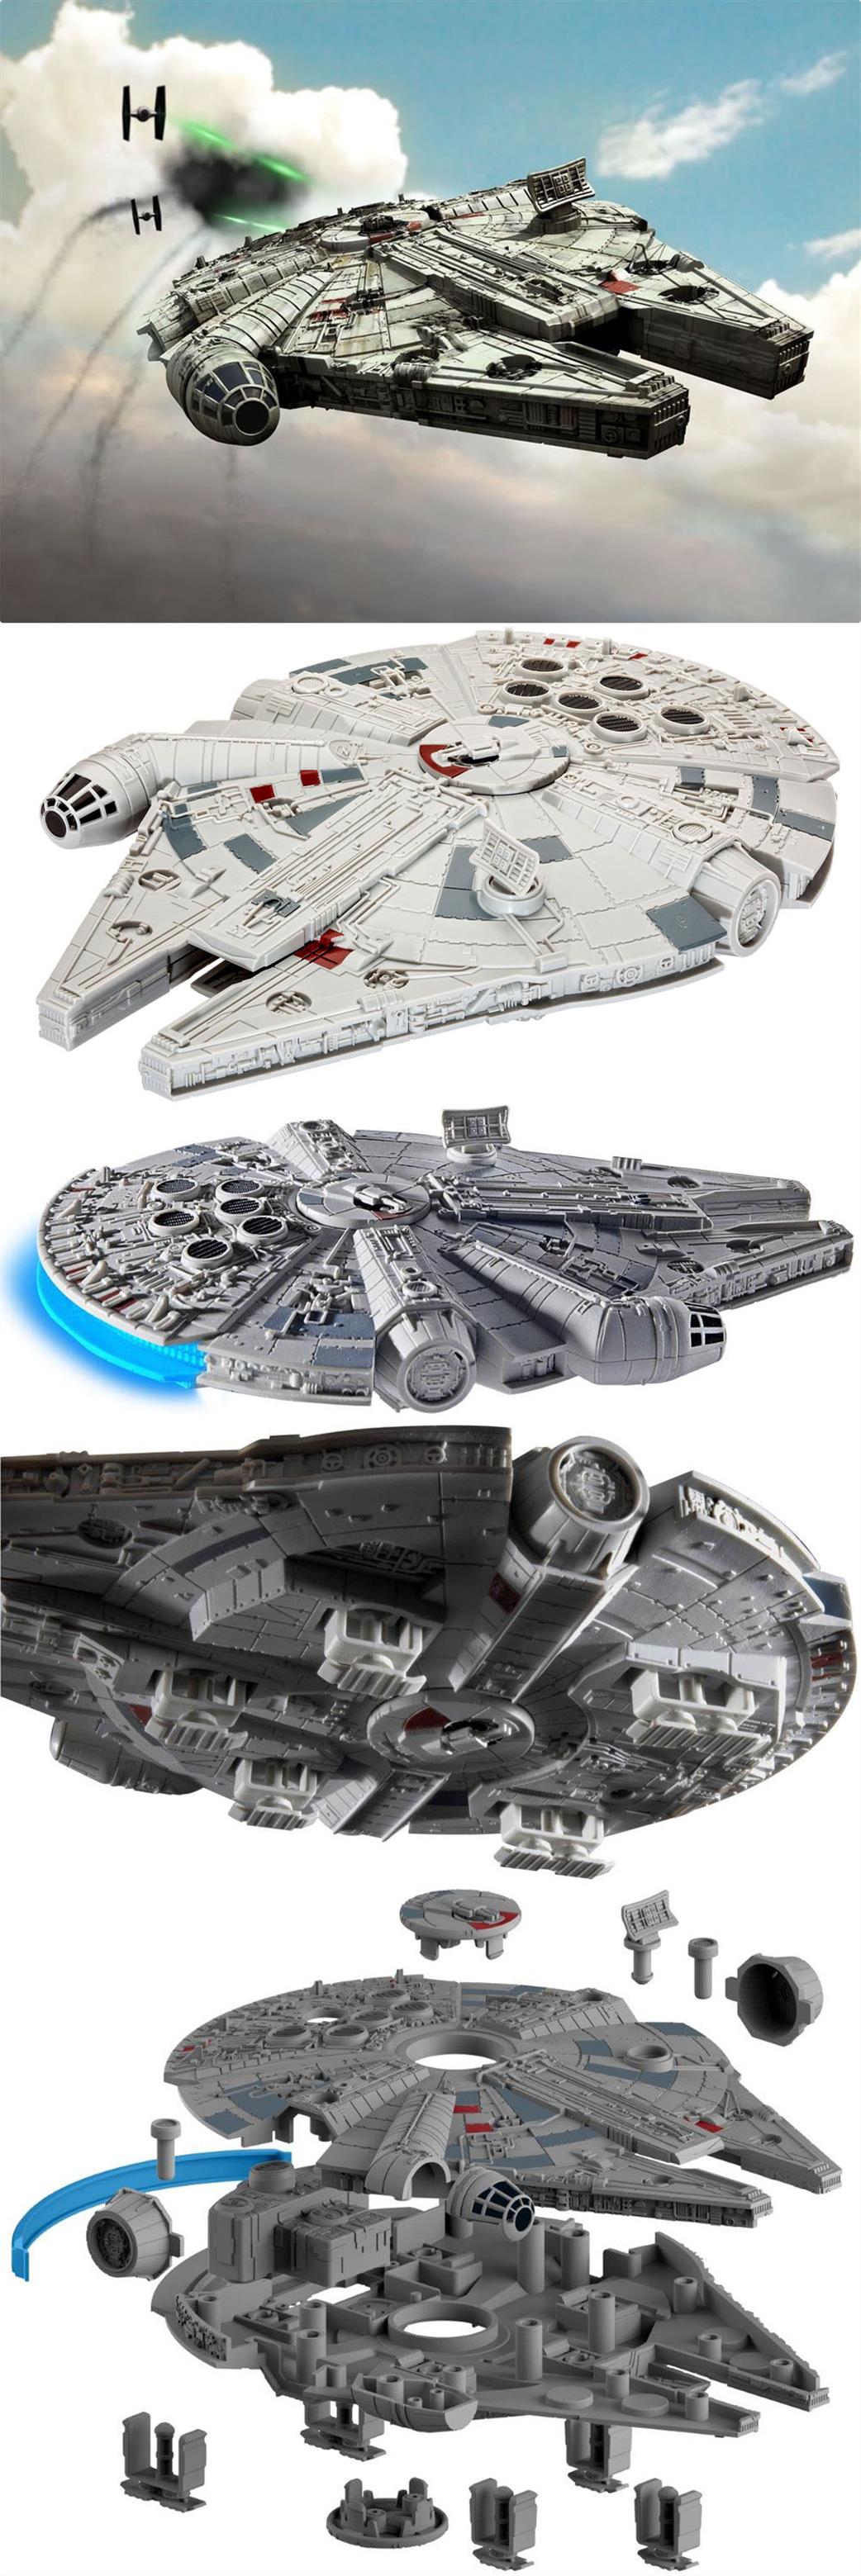 Revell 1/164 06765 Millennium Falcon from Star Wars Episode 8